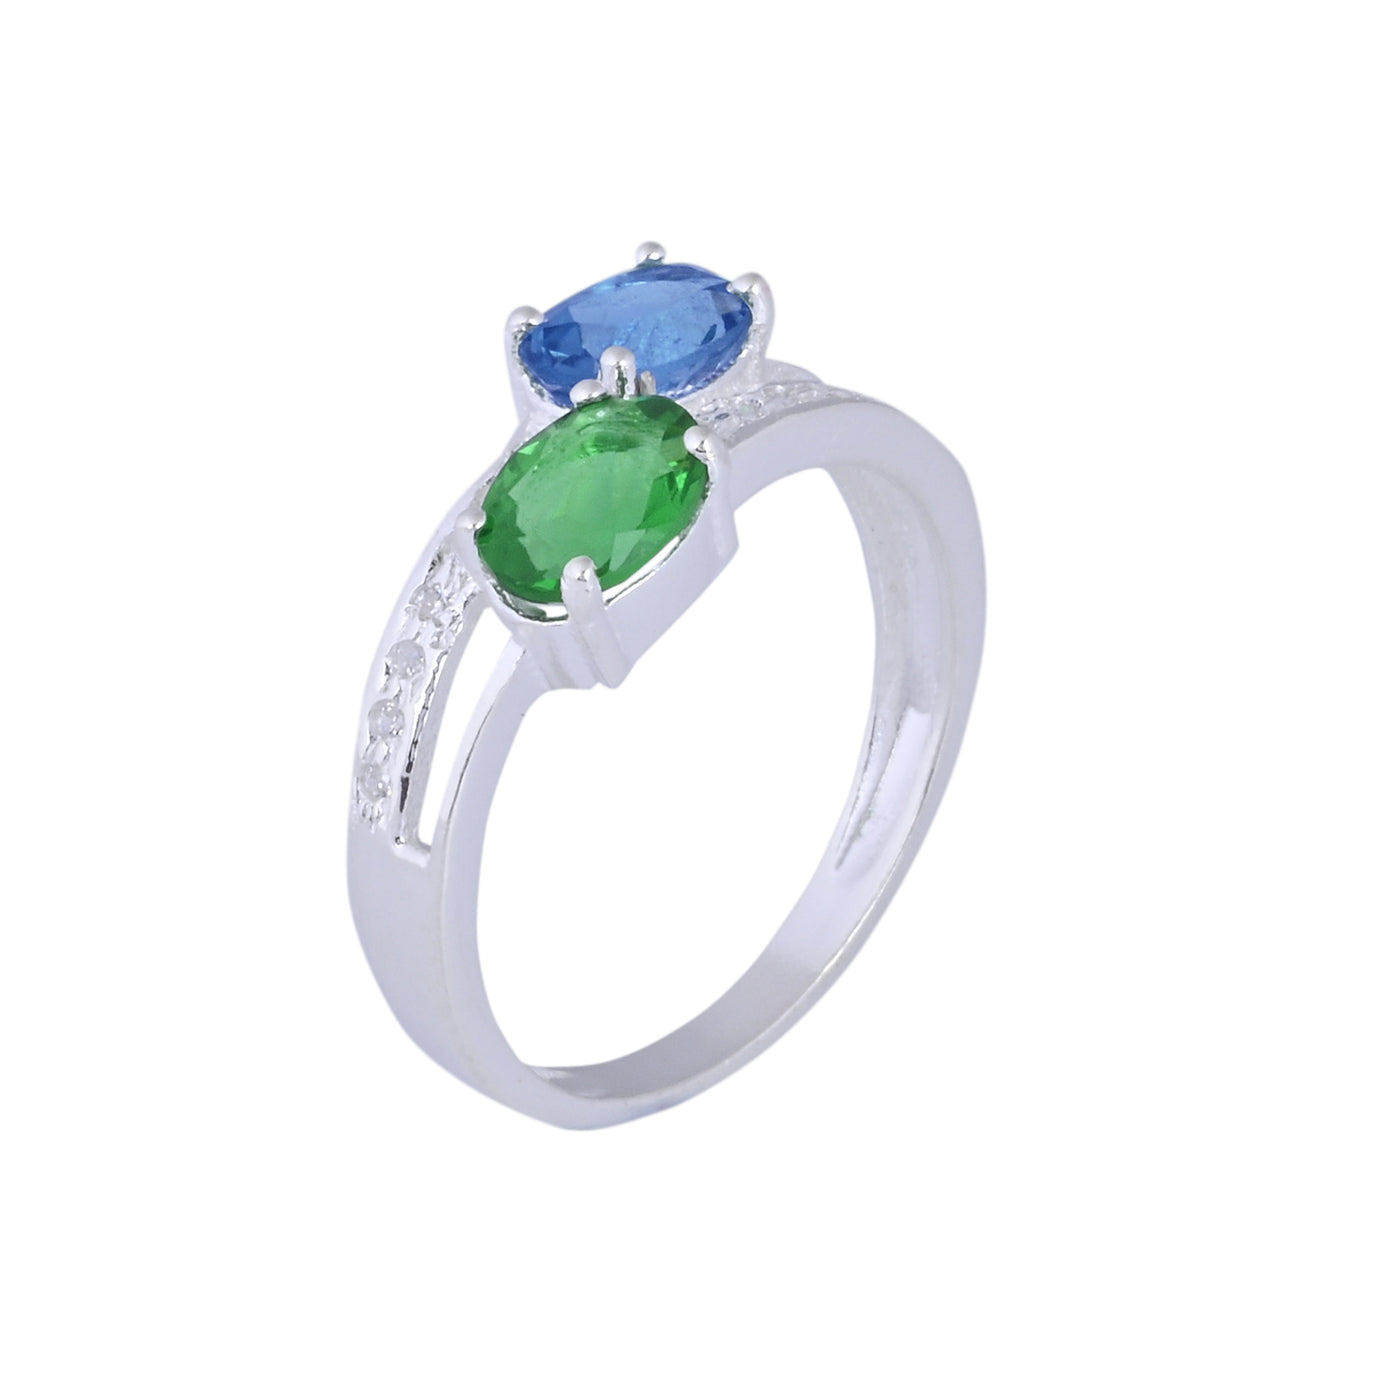 Blue Sapphire and Emerald Ring Sapphire Engagement Ring